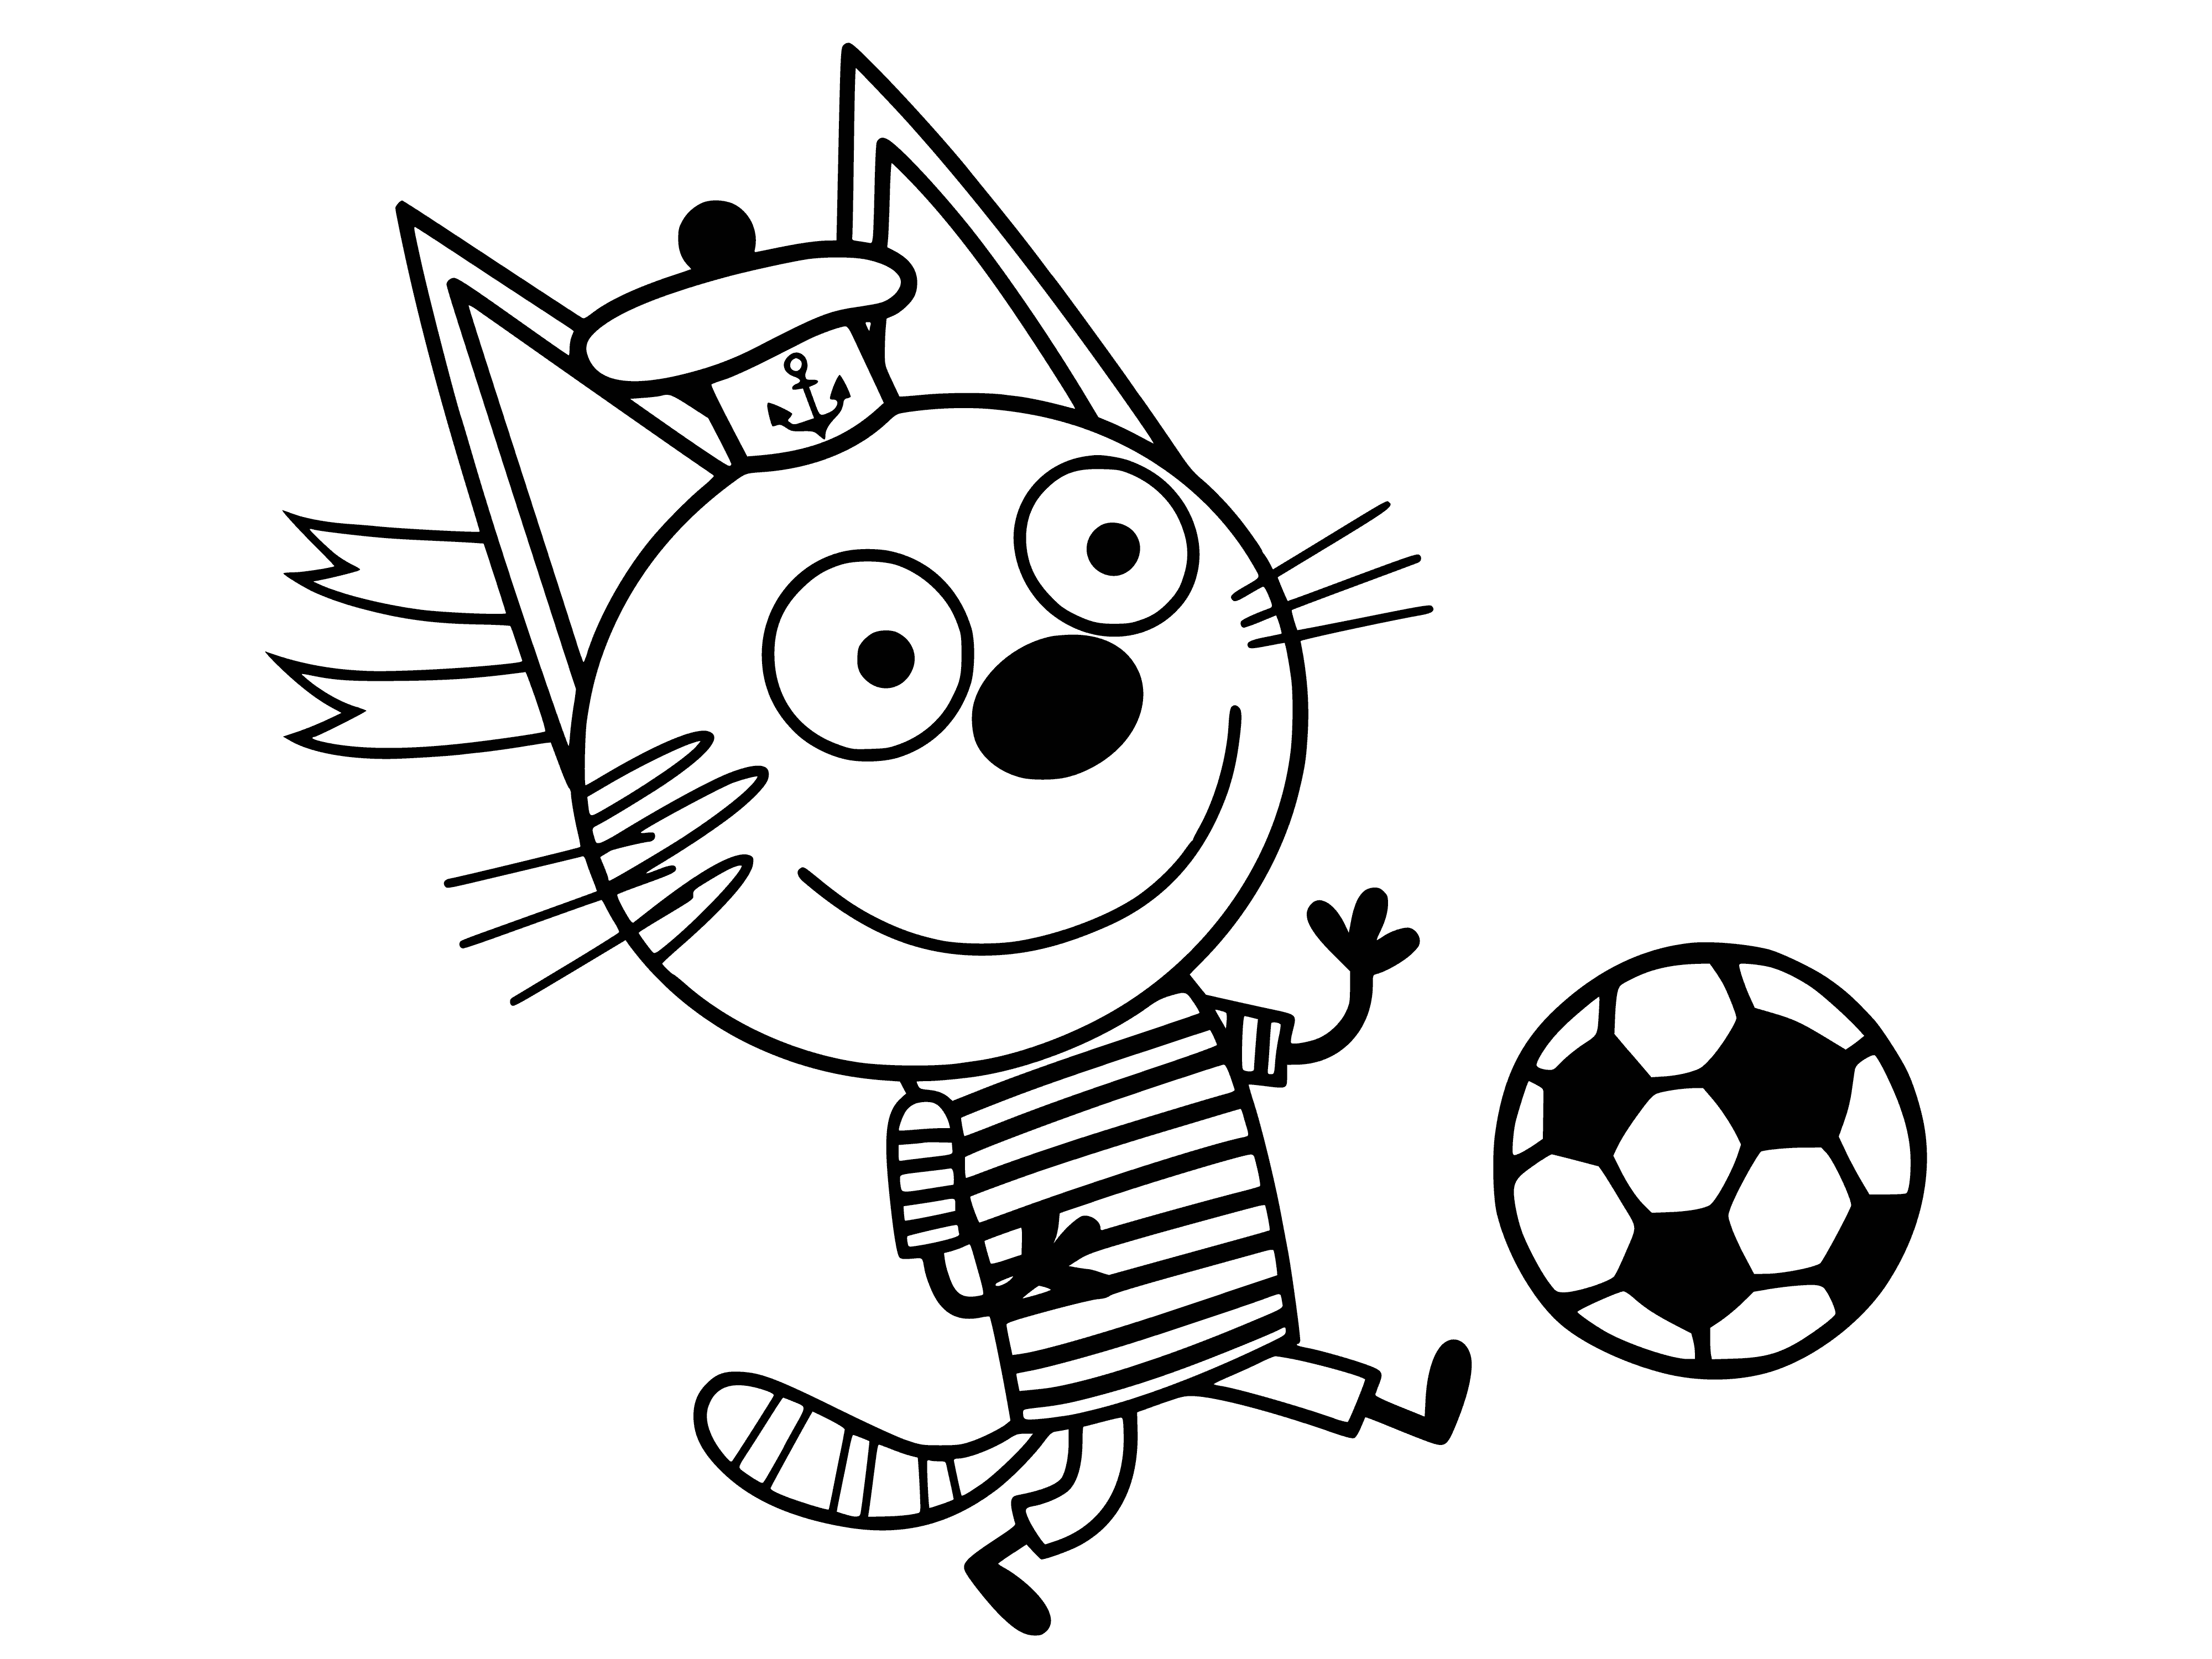 coloring page: 3 cats in coloring page: Korzhik (brown/white) loves football and 2 black/white cats standing on either side of him w/tongues out.